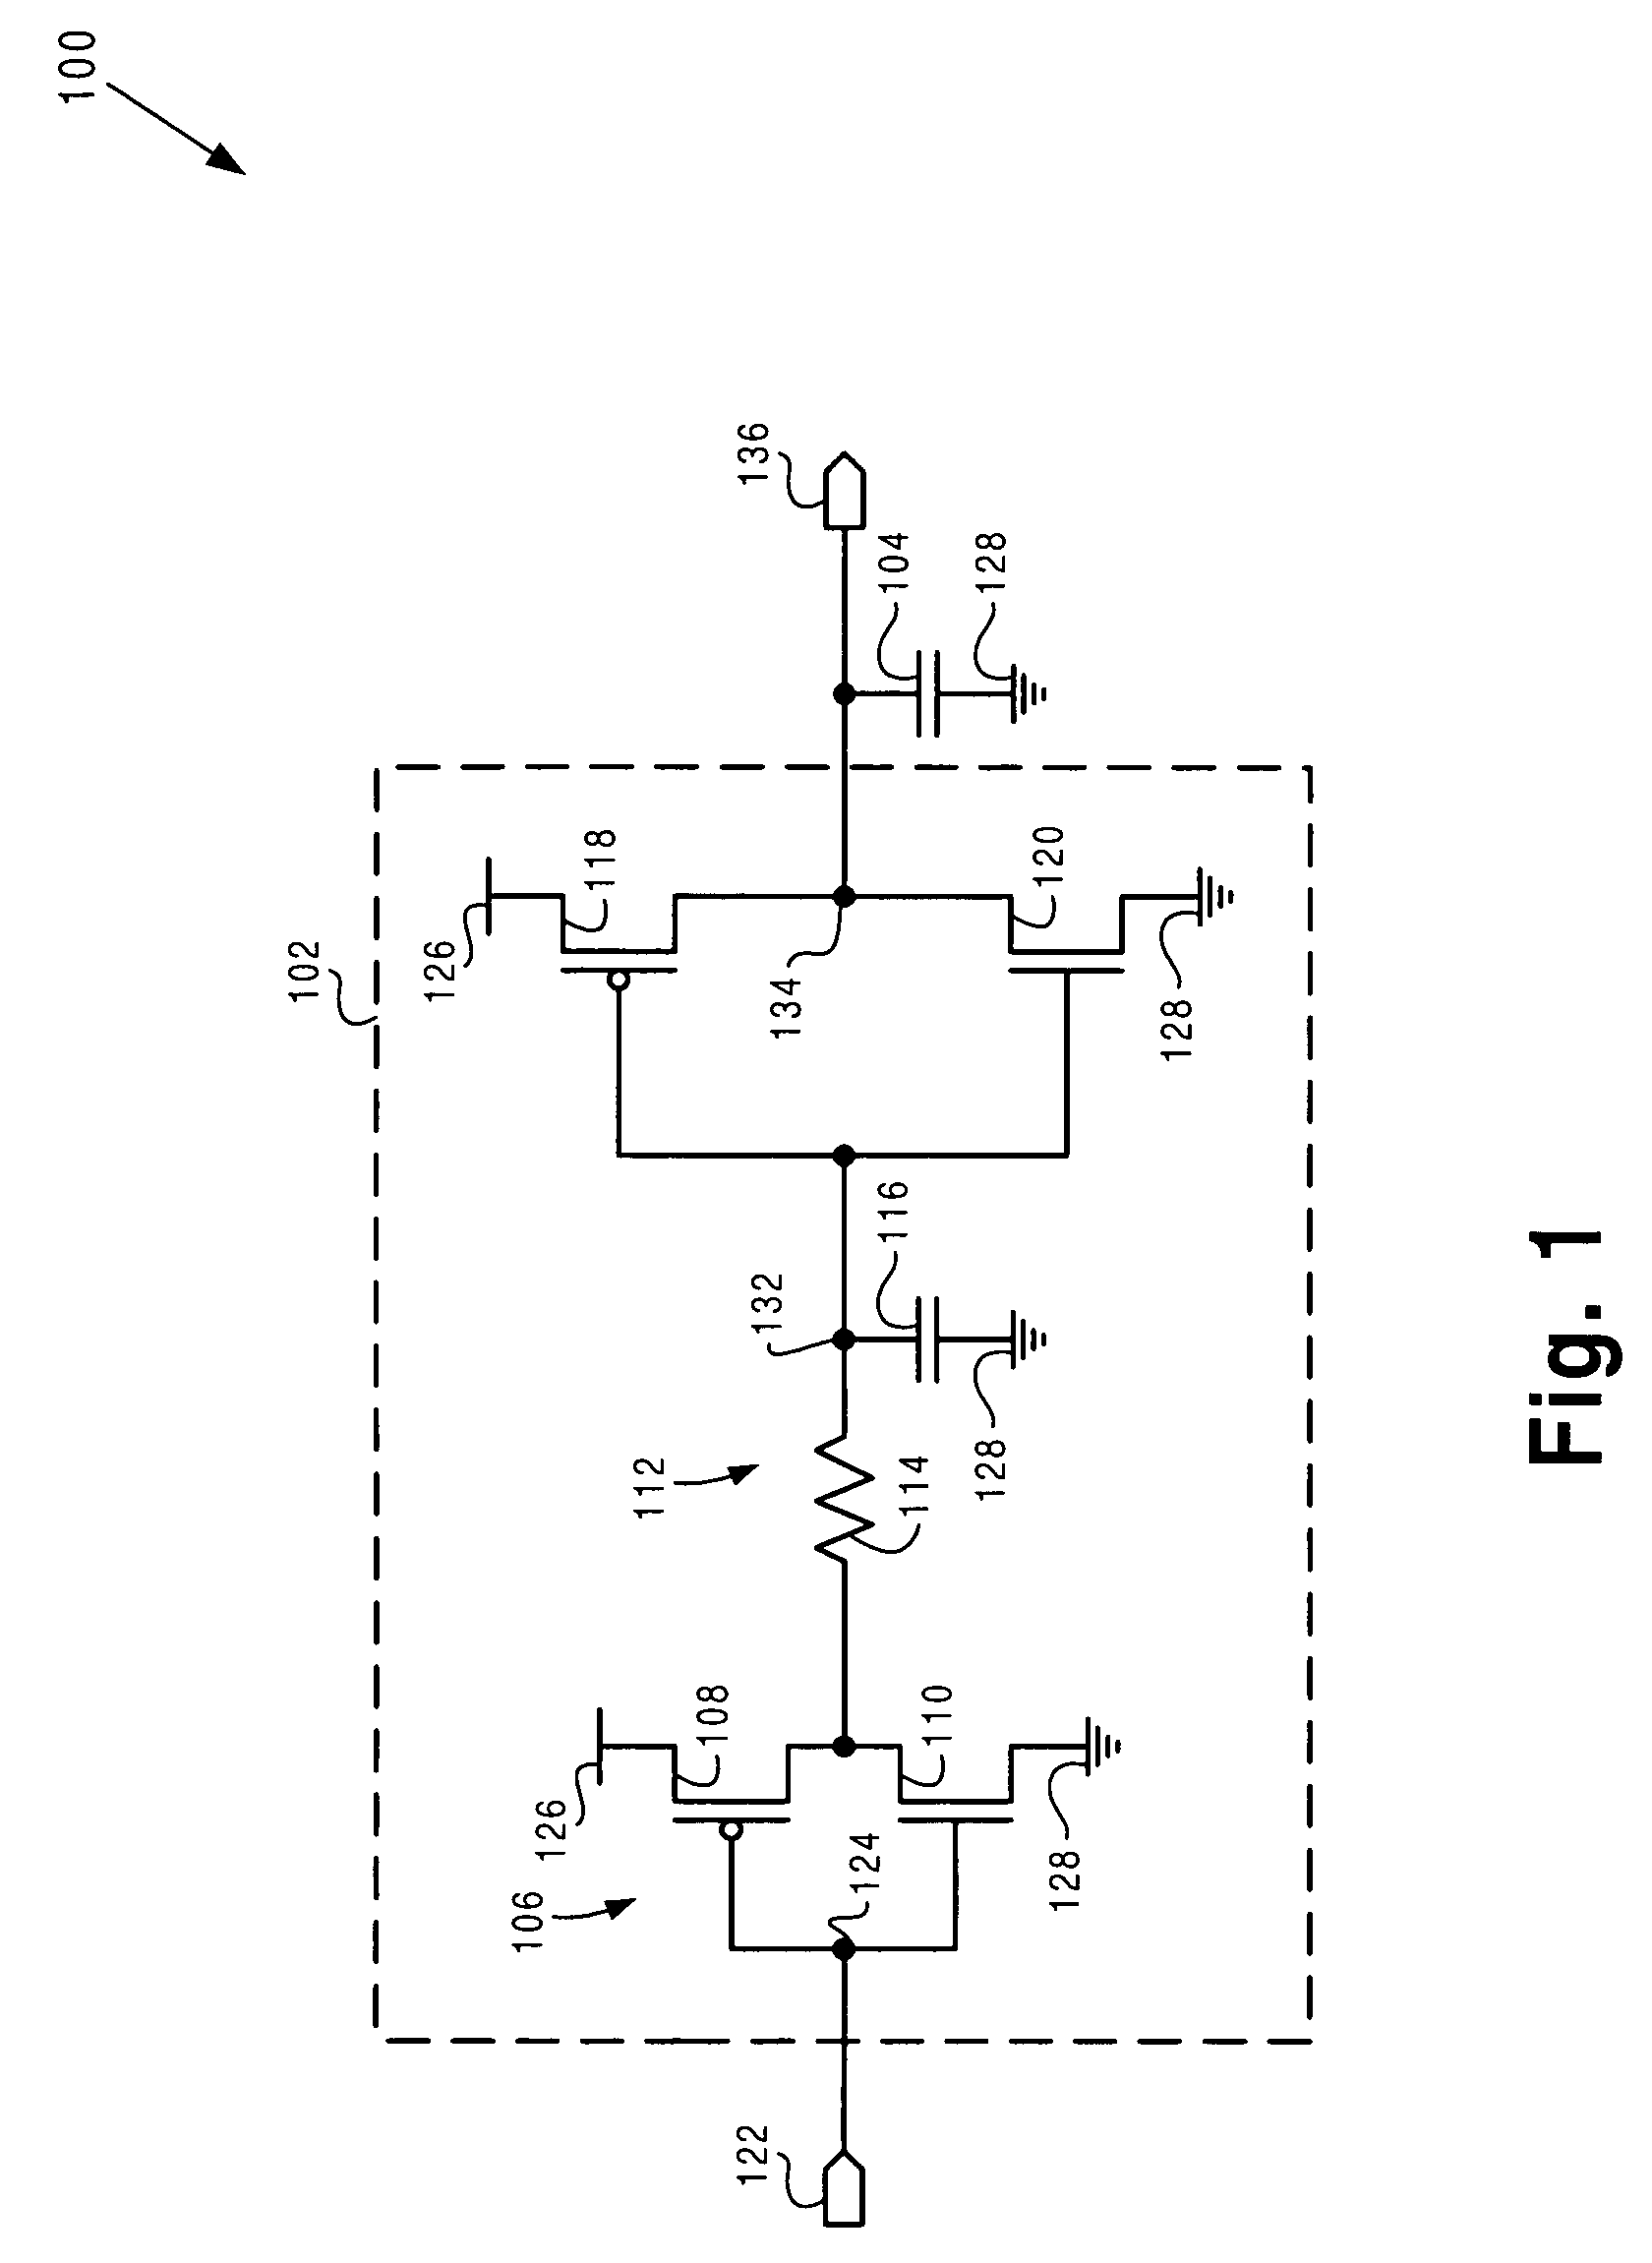 Output driver circuit with reduced RF noise, reduced power consumption, and reduced load capacitance susceptibility